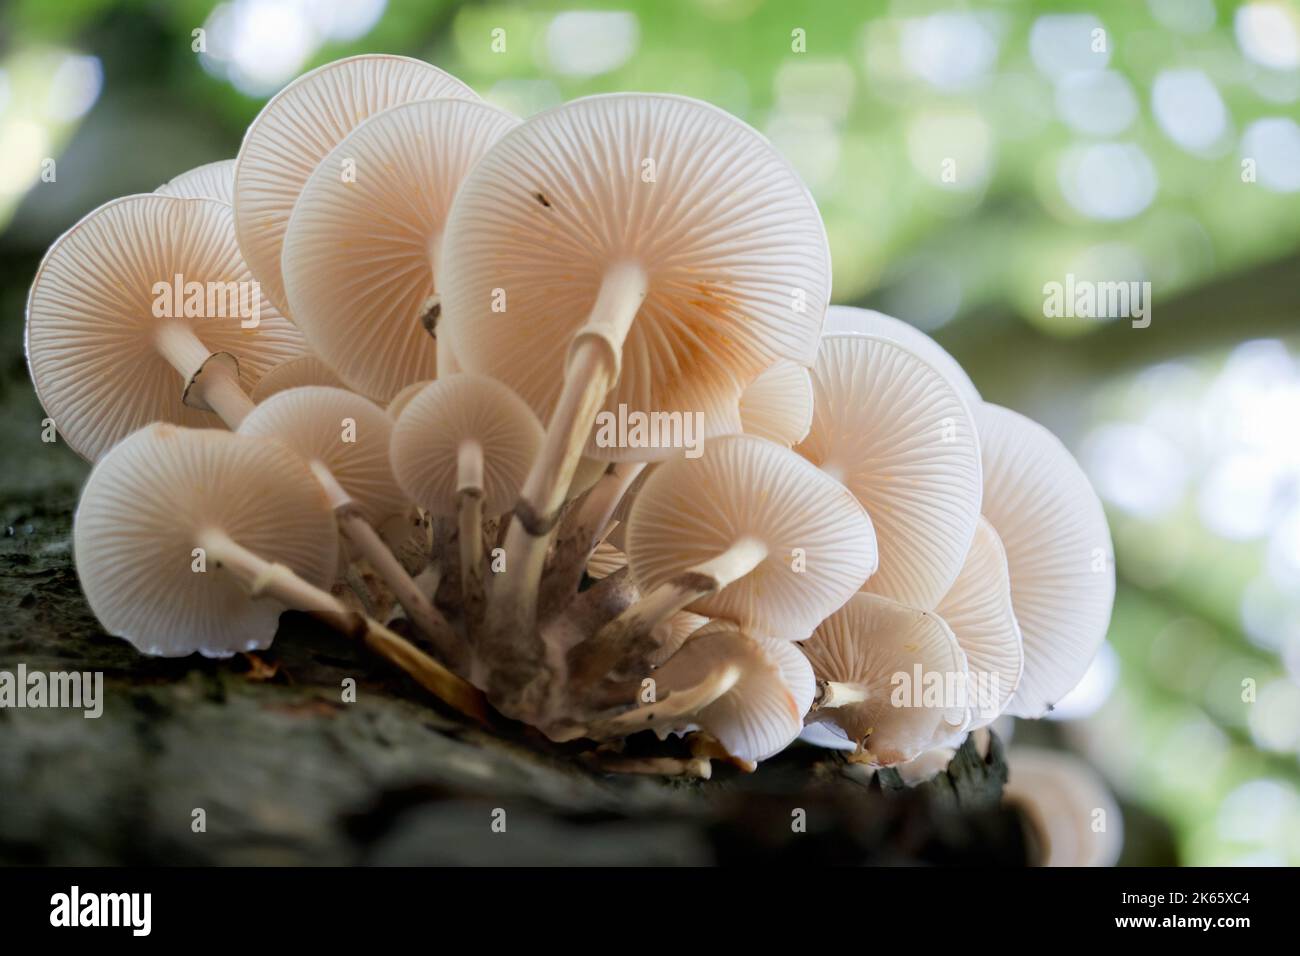 Cluster of Porcelain fungus, white mushrooms with a translucent cap, on a rotting beech tree Stock Photo